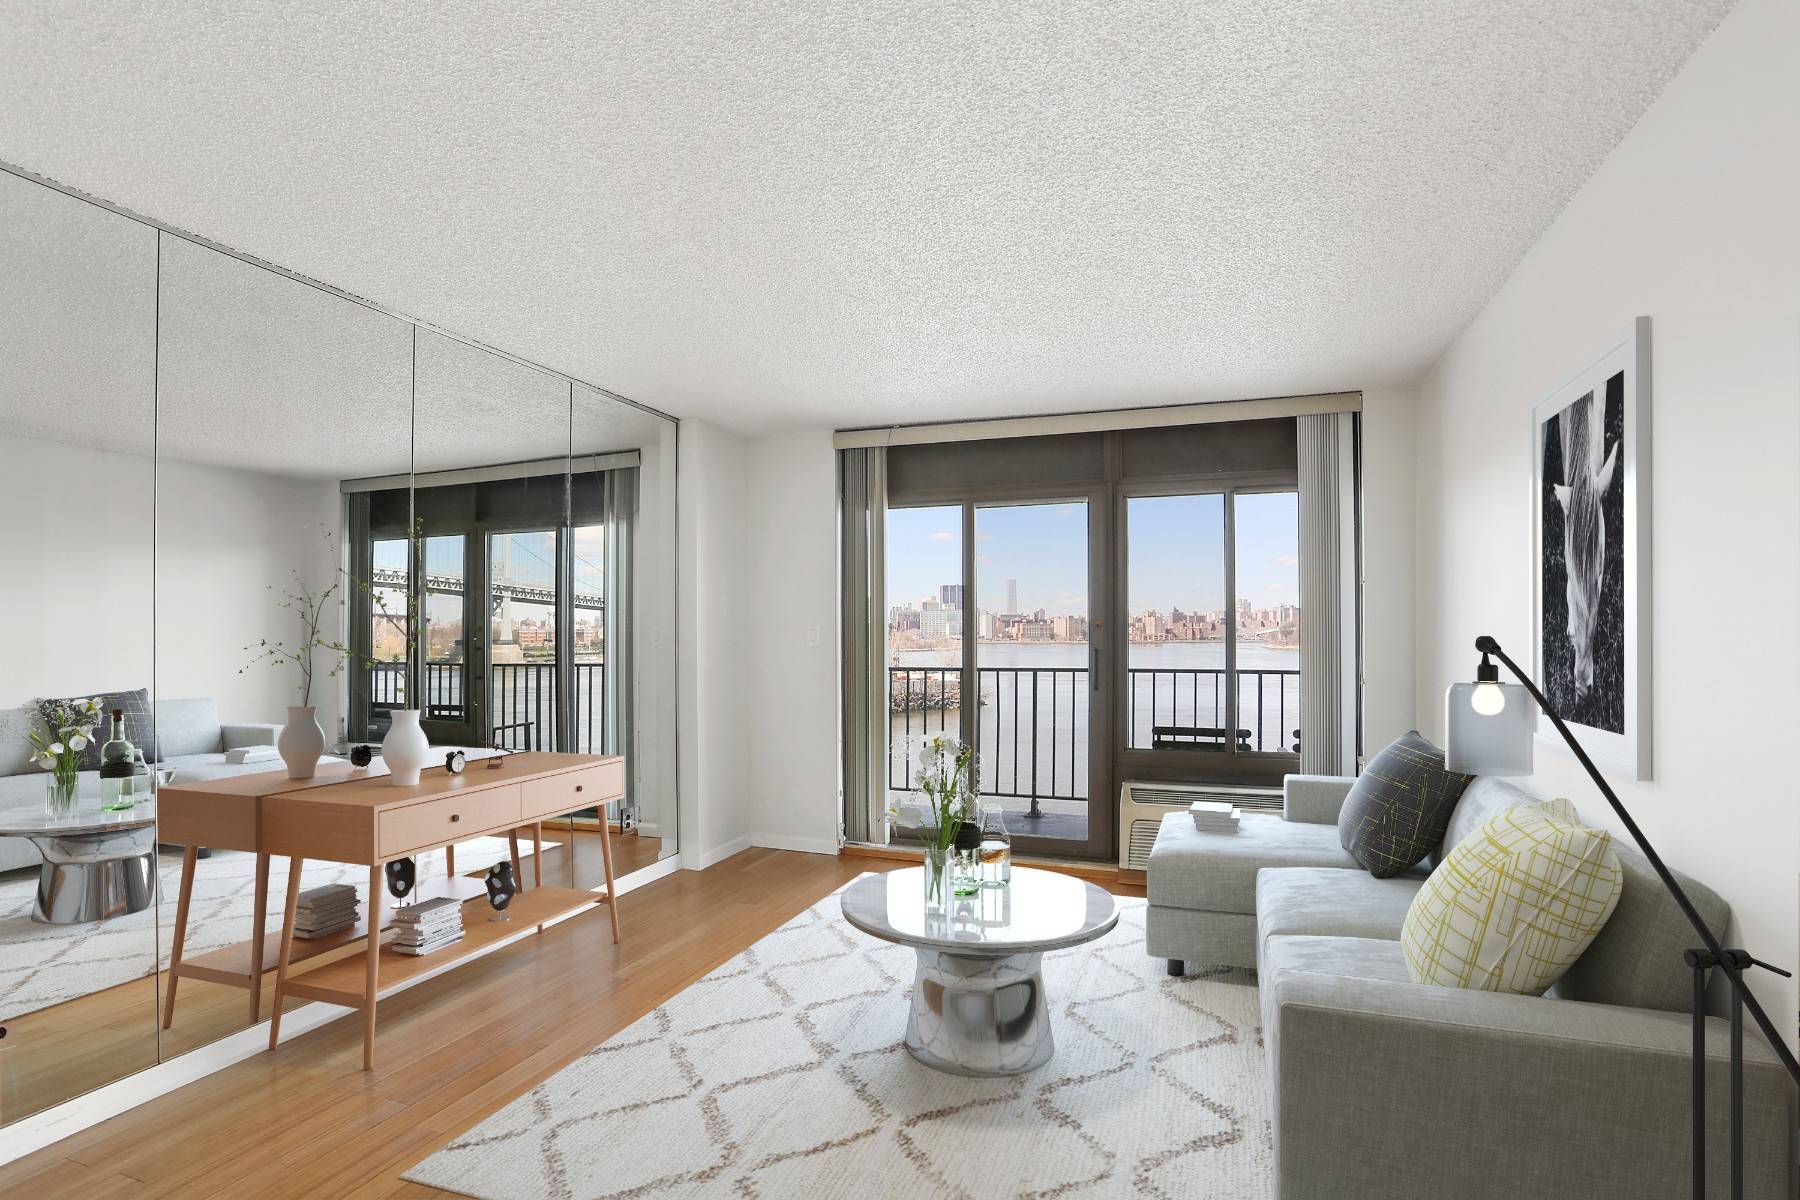 Sensational one bedroom apartment with direct unobstructed water view of the East River and an oversized balcony in the magnificent Shore Towers.